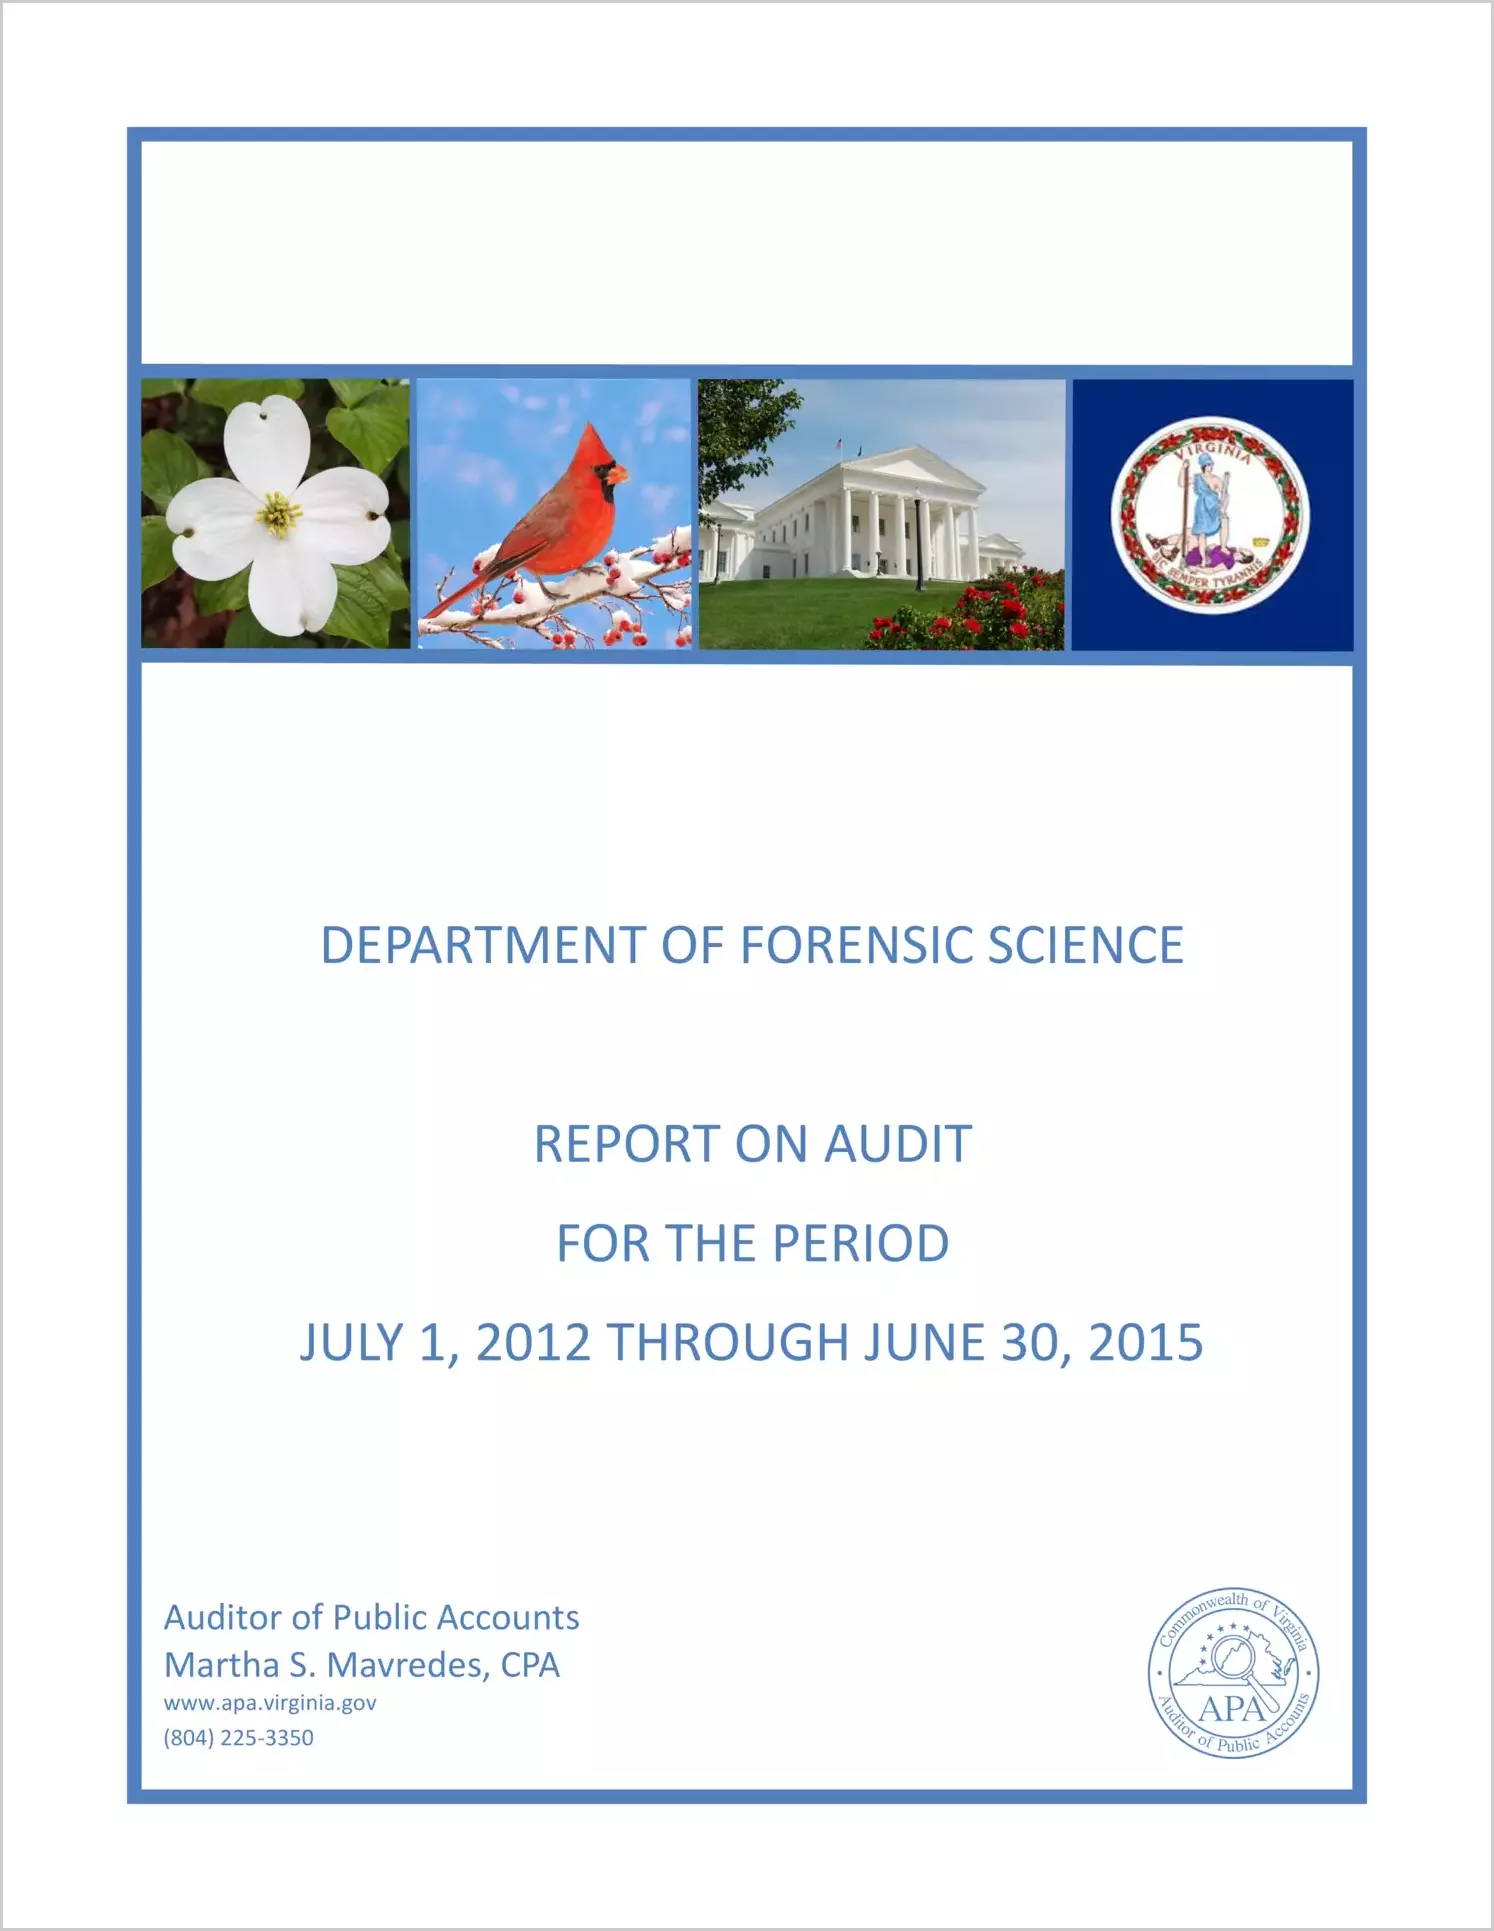 Department of Forensic Science for the period July 1, 2012 through June 30, 2015